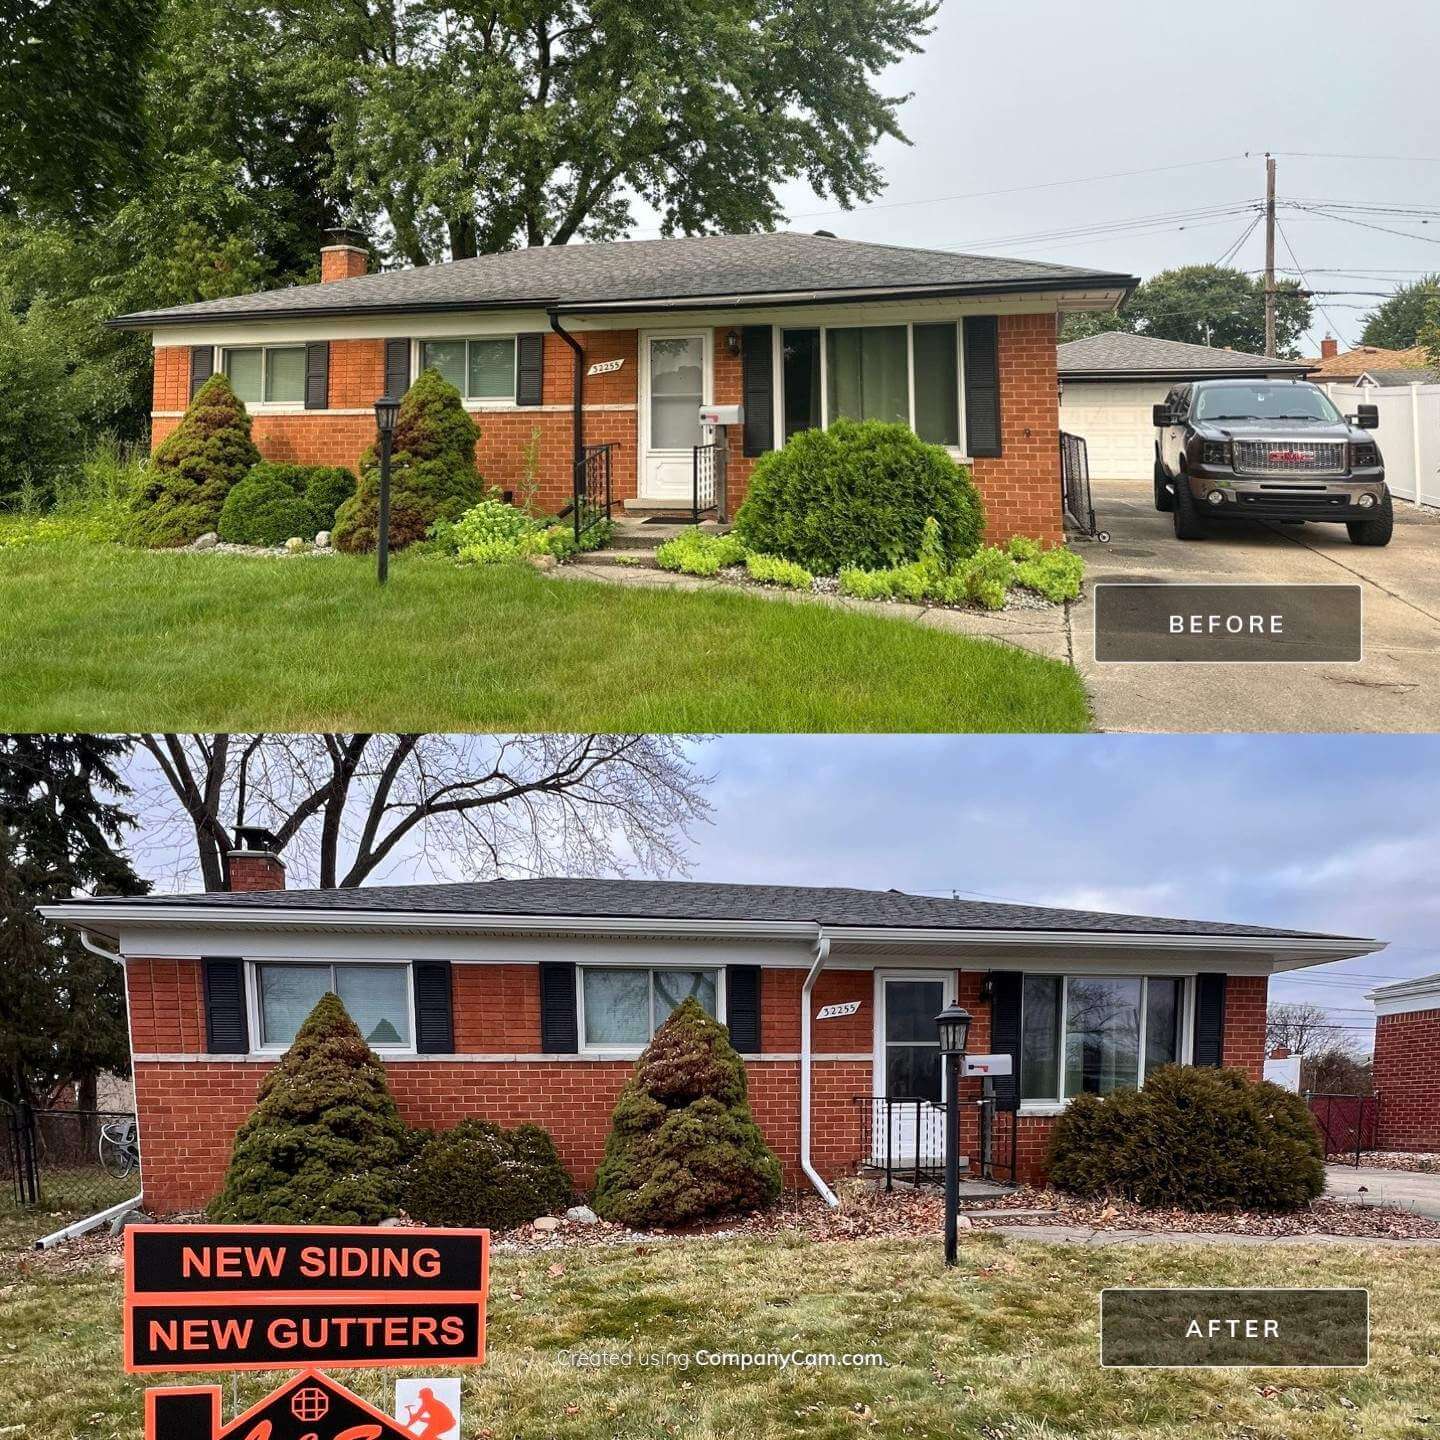 Before and after of a home with new gutters